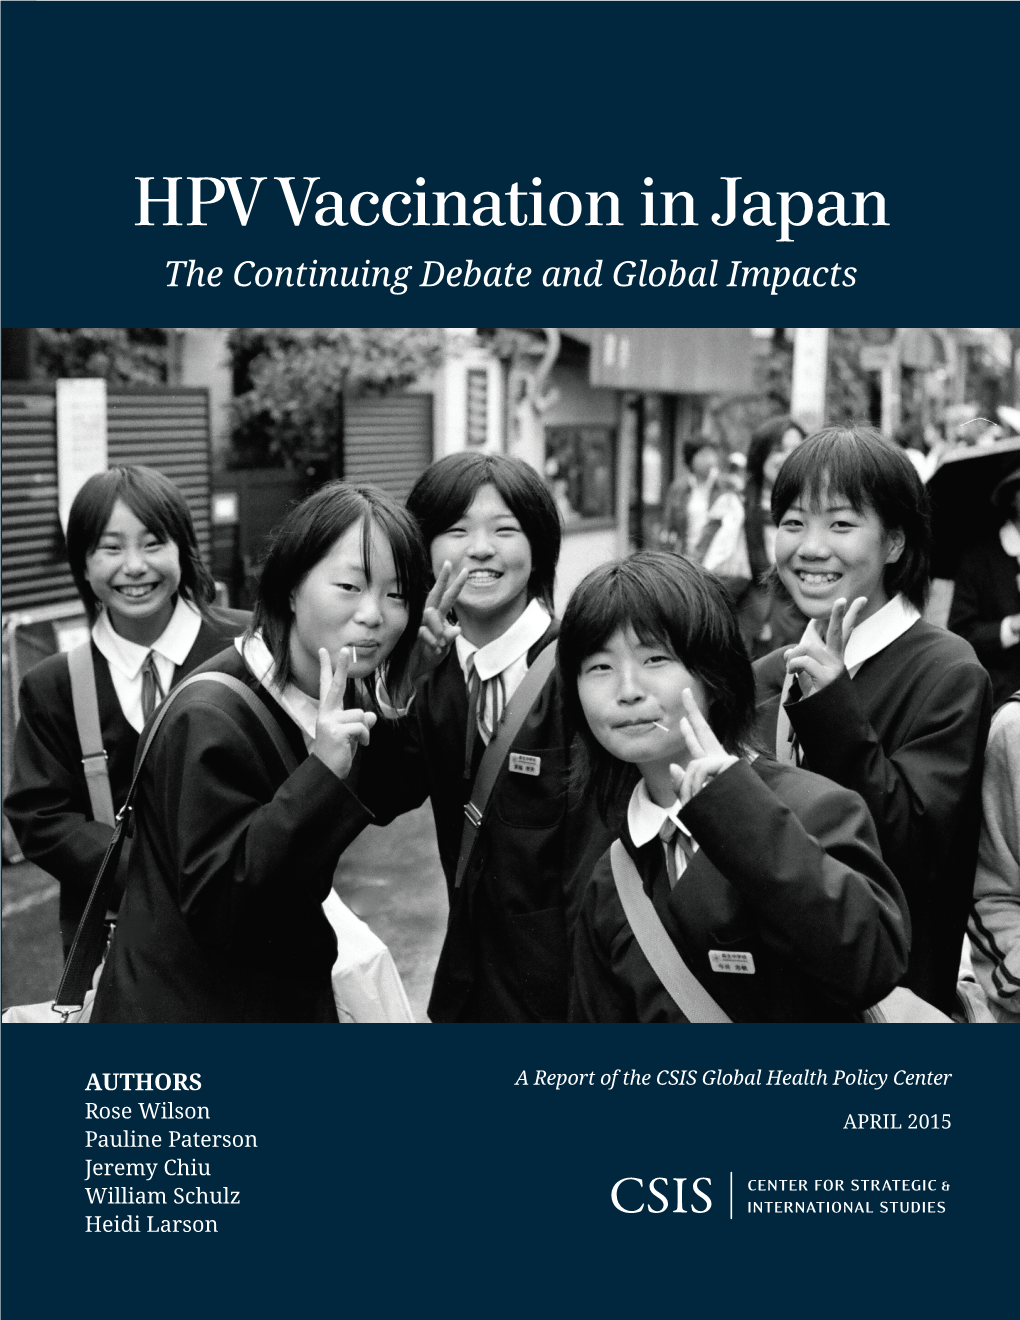 HPV Vaccination in Japan: the Continuing Debate and Global